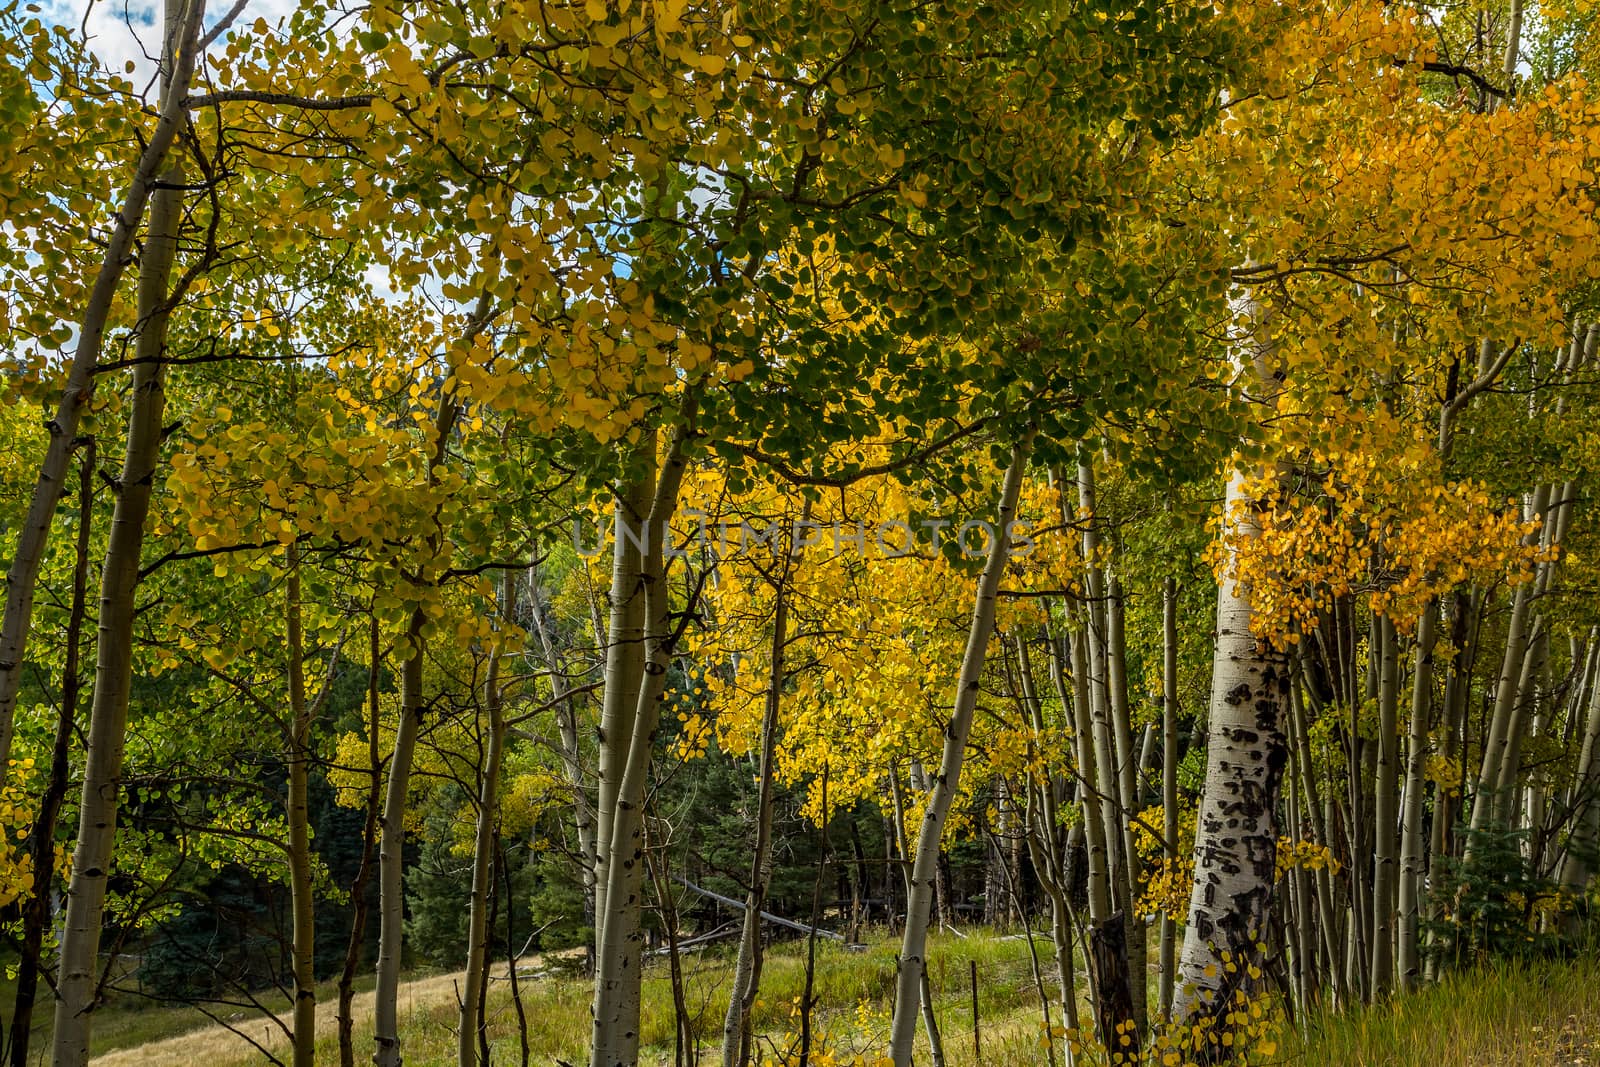 Aspen leaves beginning to change color in the fall.